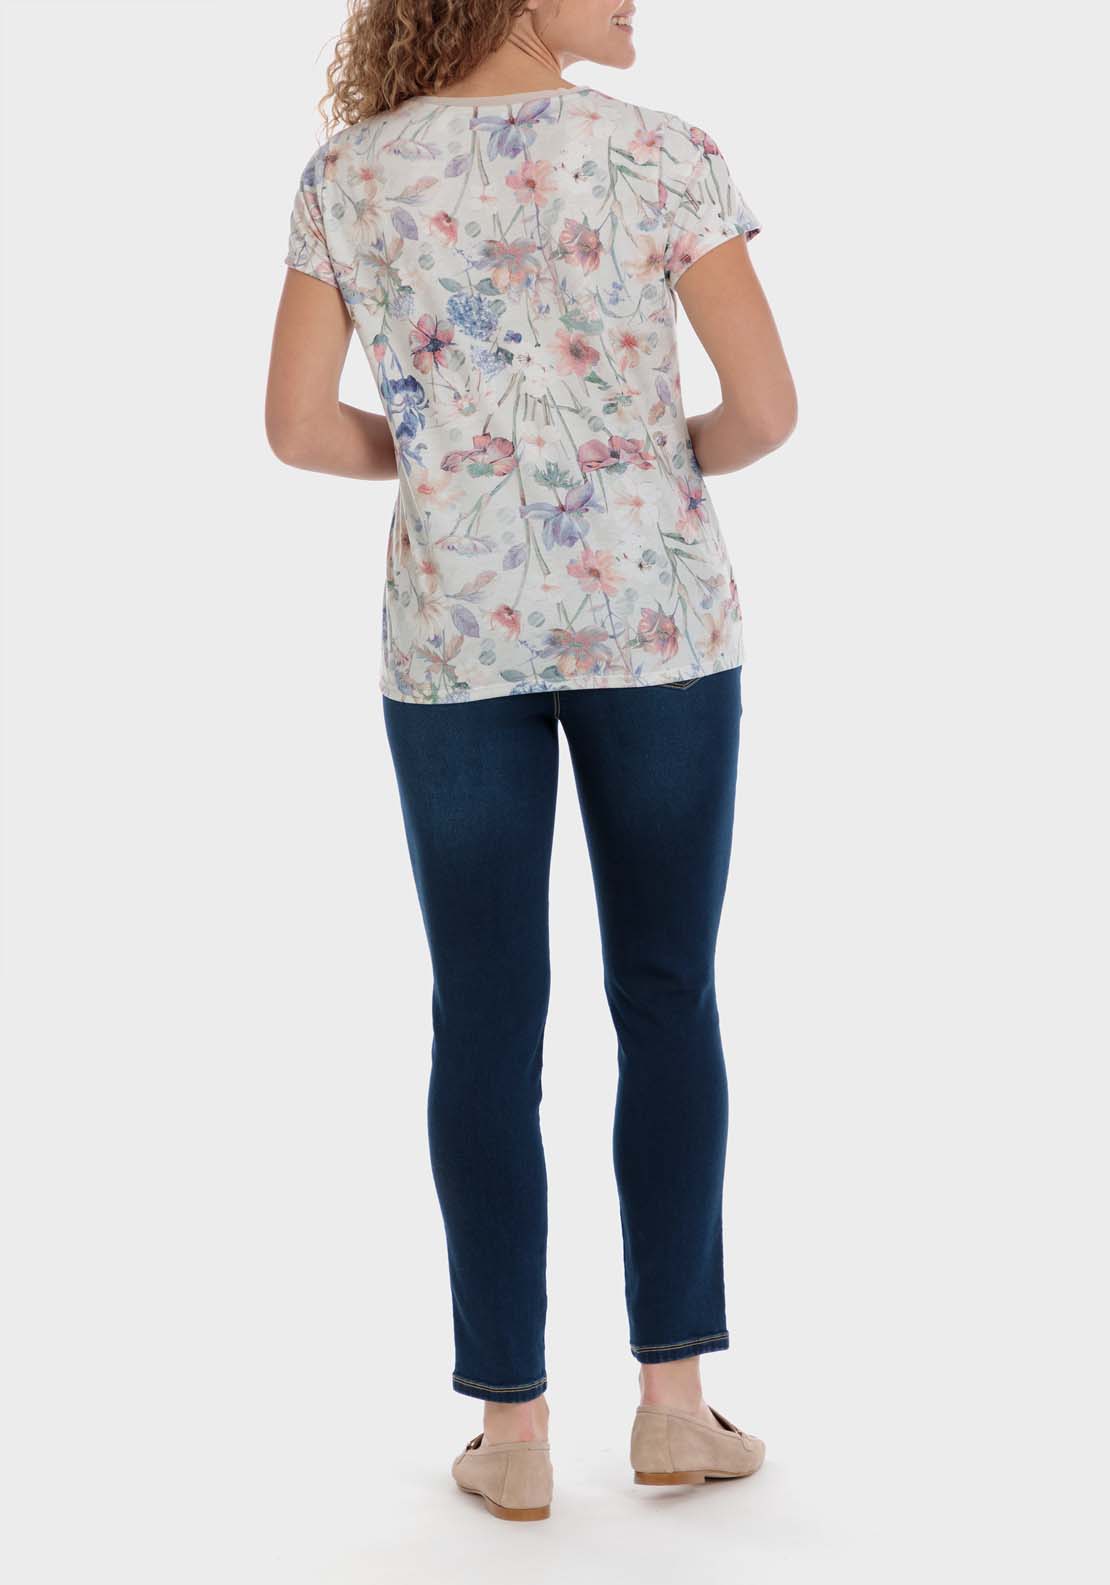 Punt Roma Floral Print T-Shirt 4 Shaws Department Stores